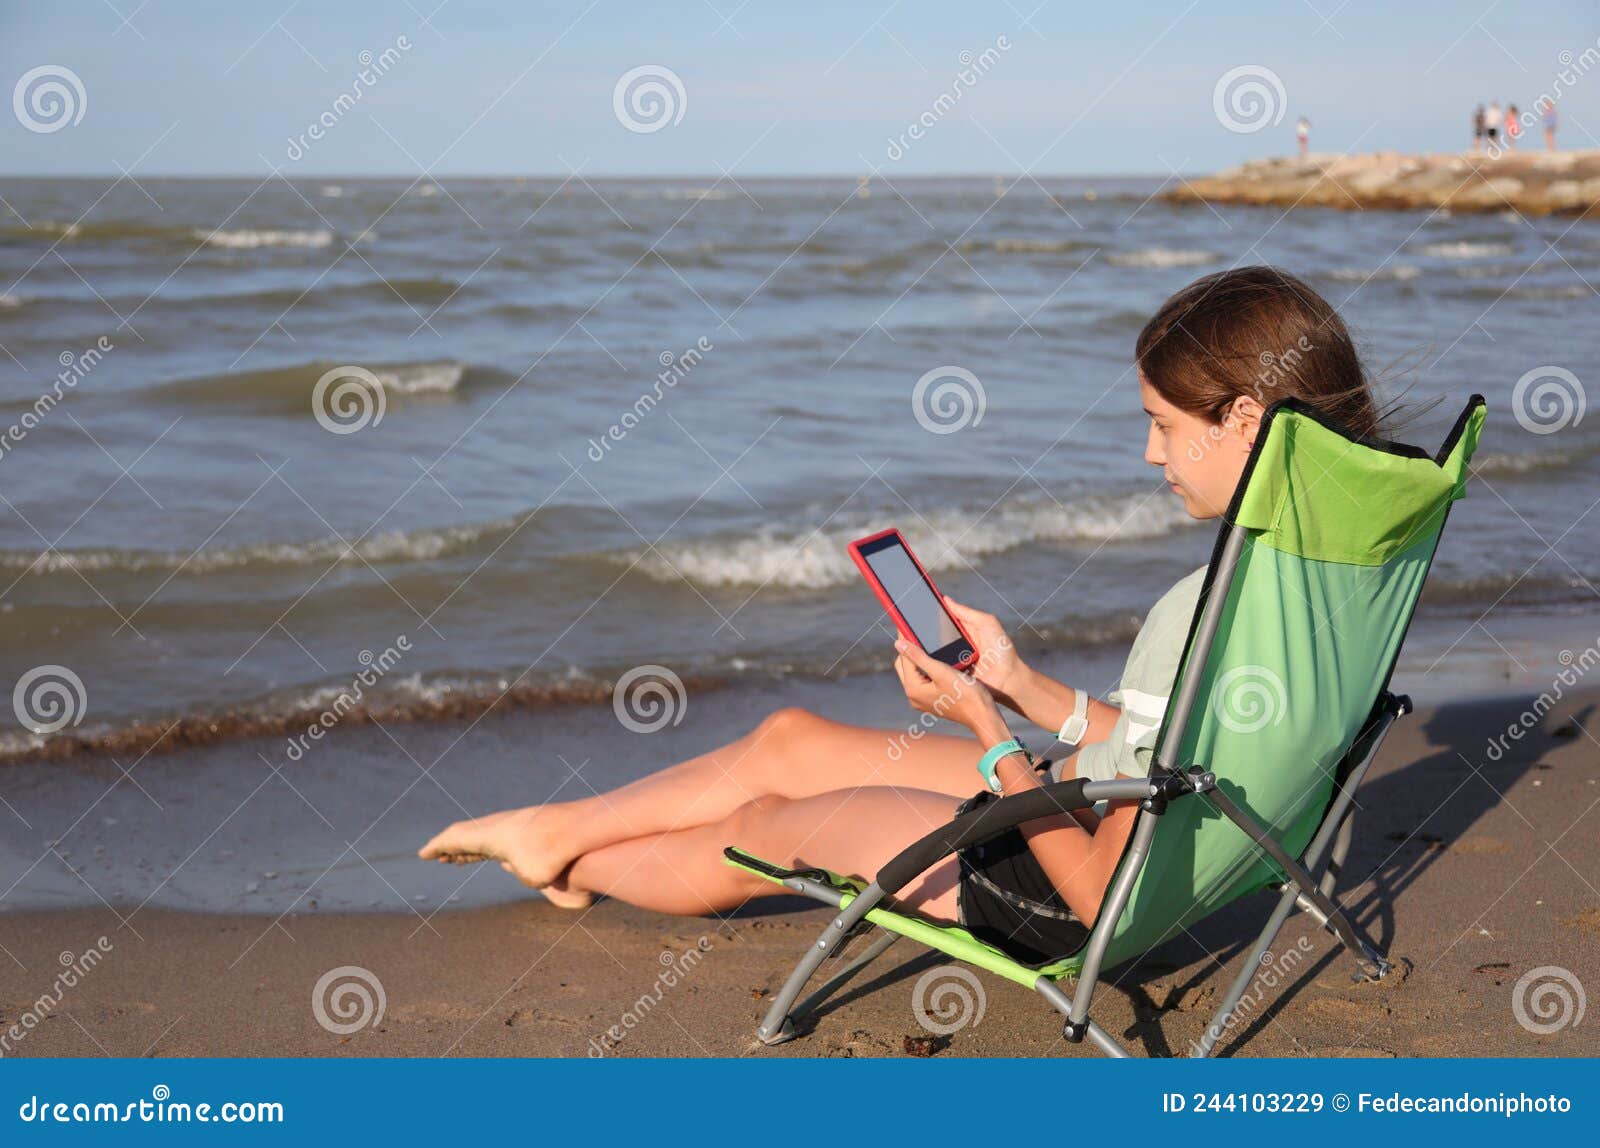 young girl reads an ebook on the deckchair relaxing by the sea